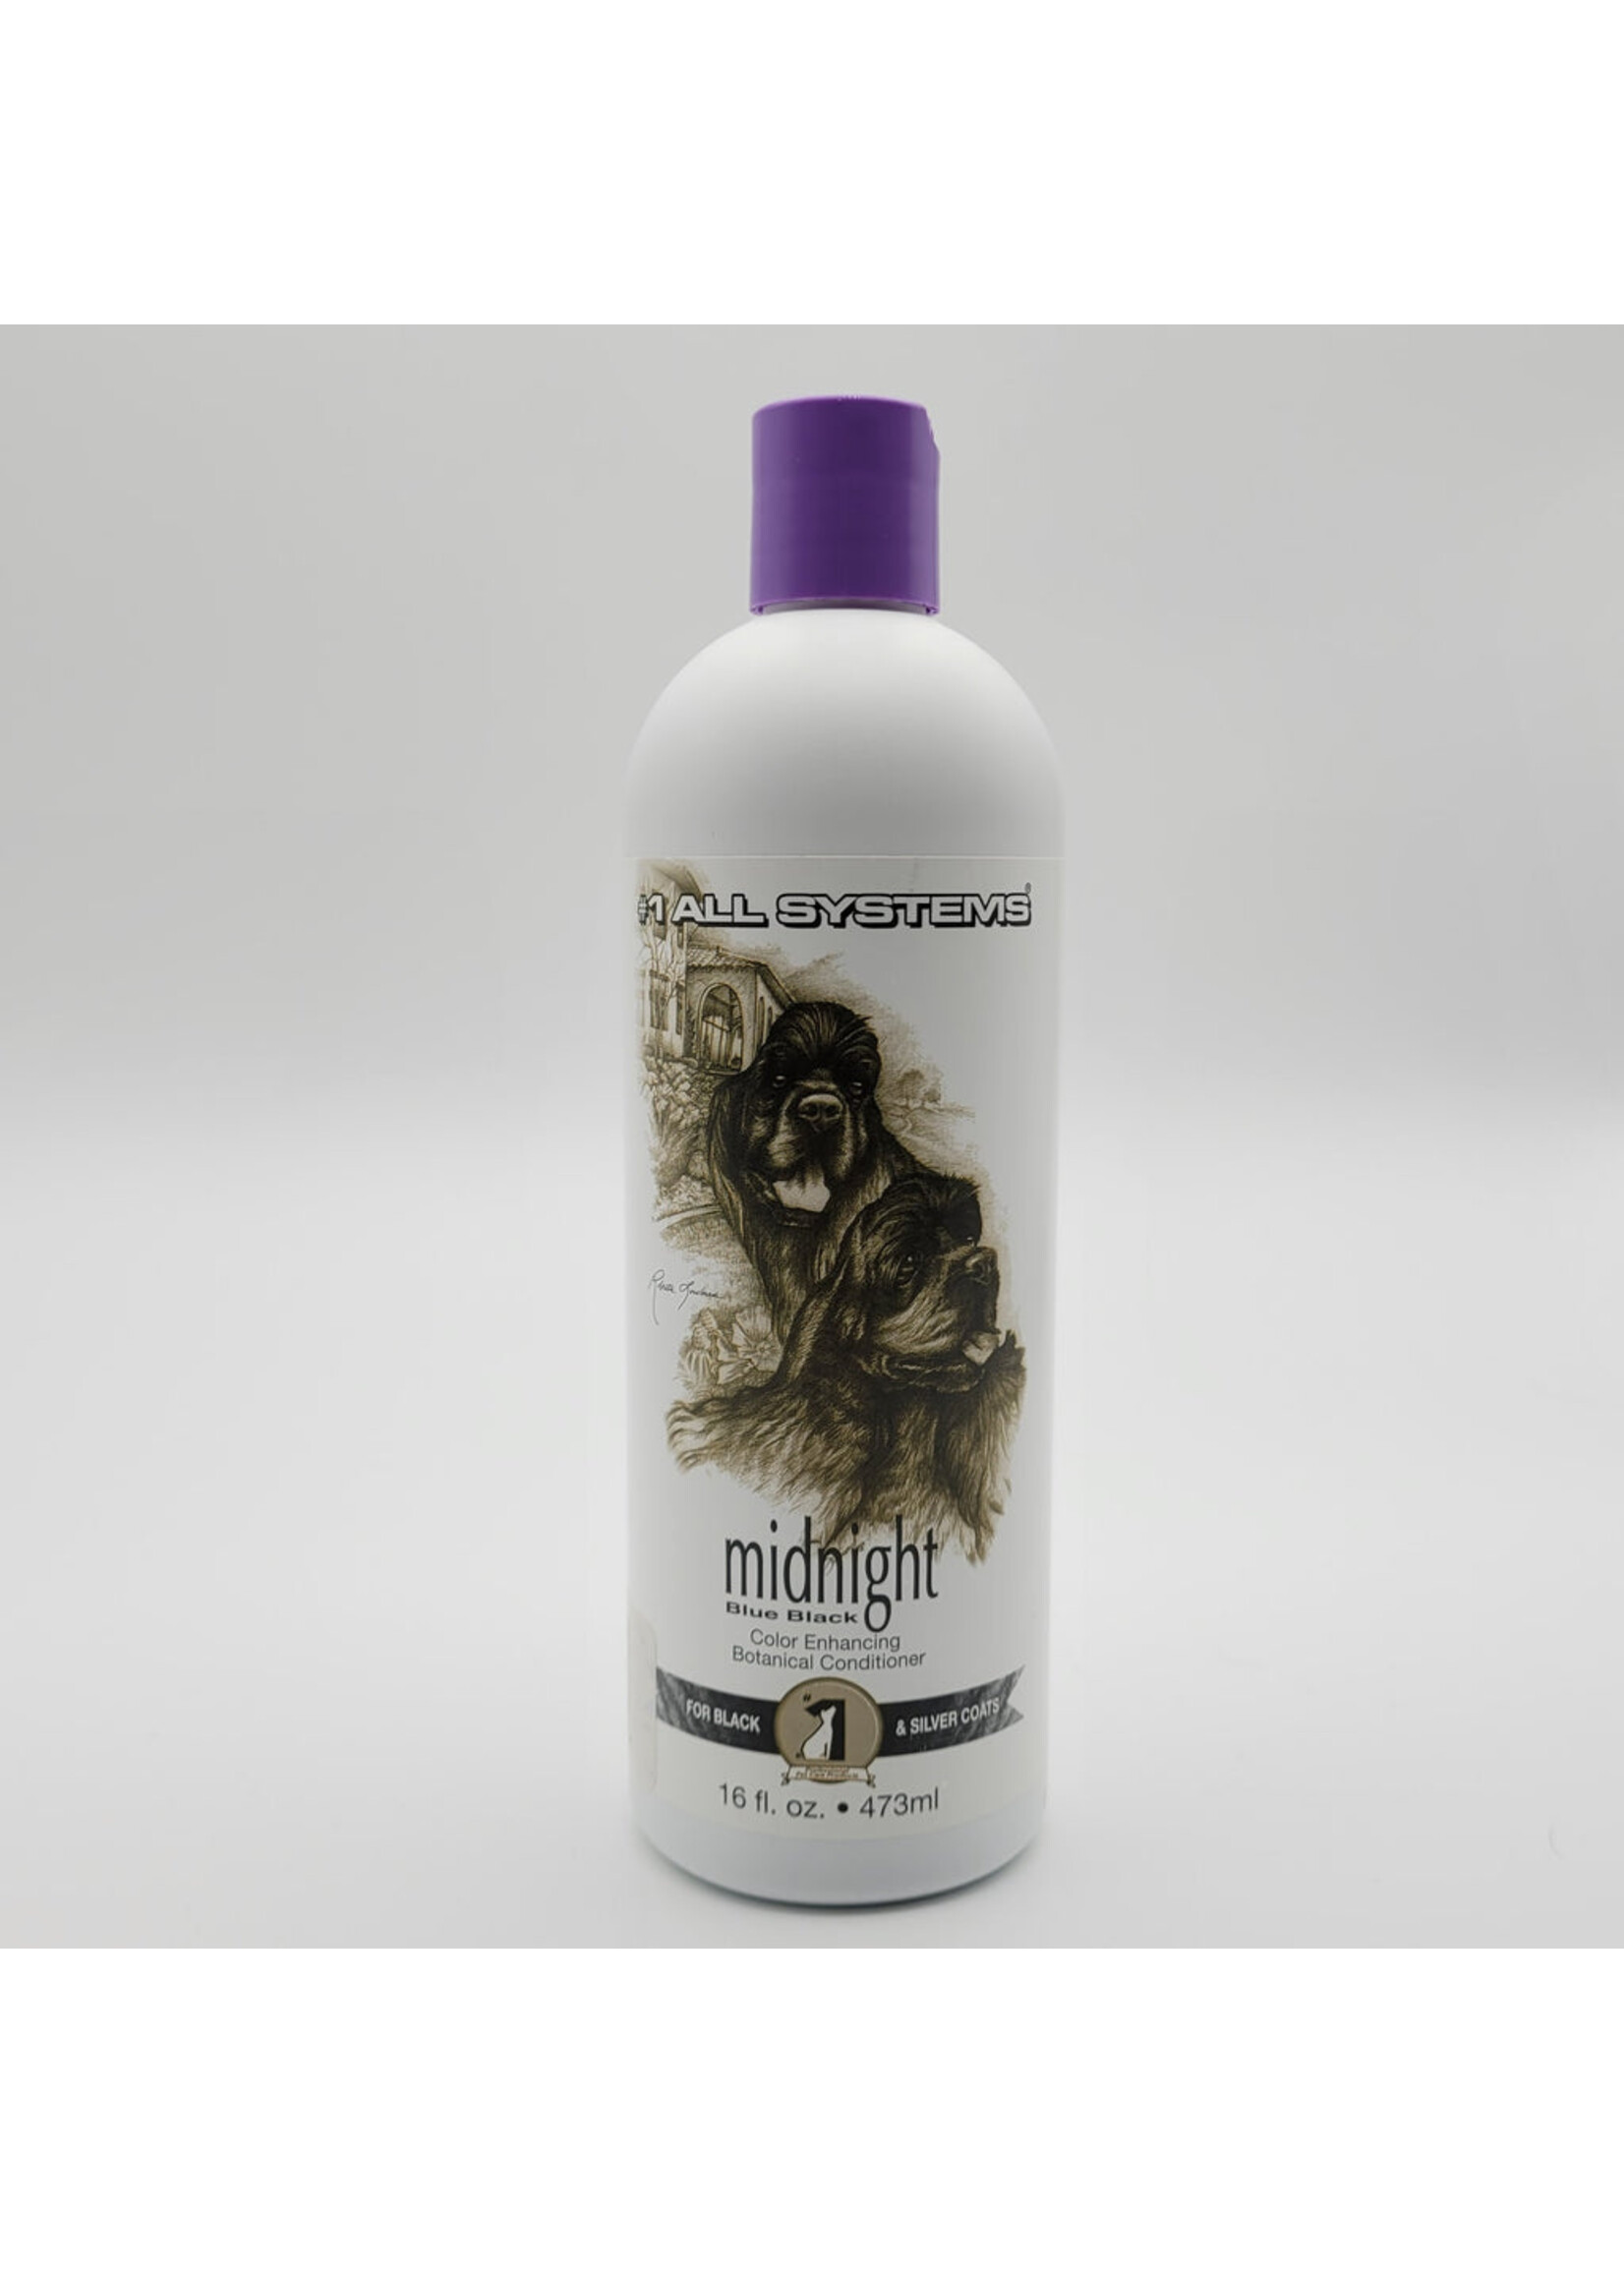 #1 All Systems #1 All Systems Midnight Conditioner 16oz